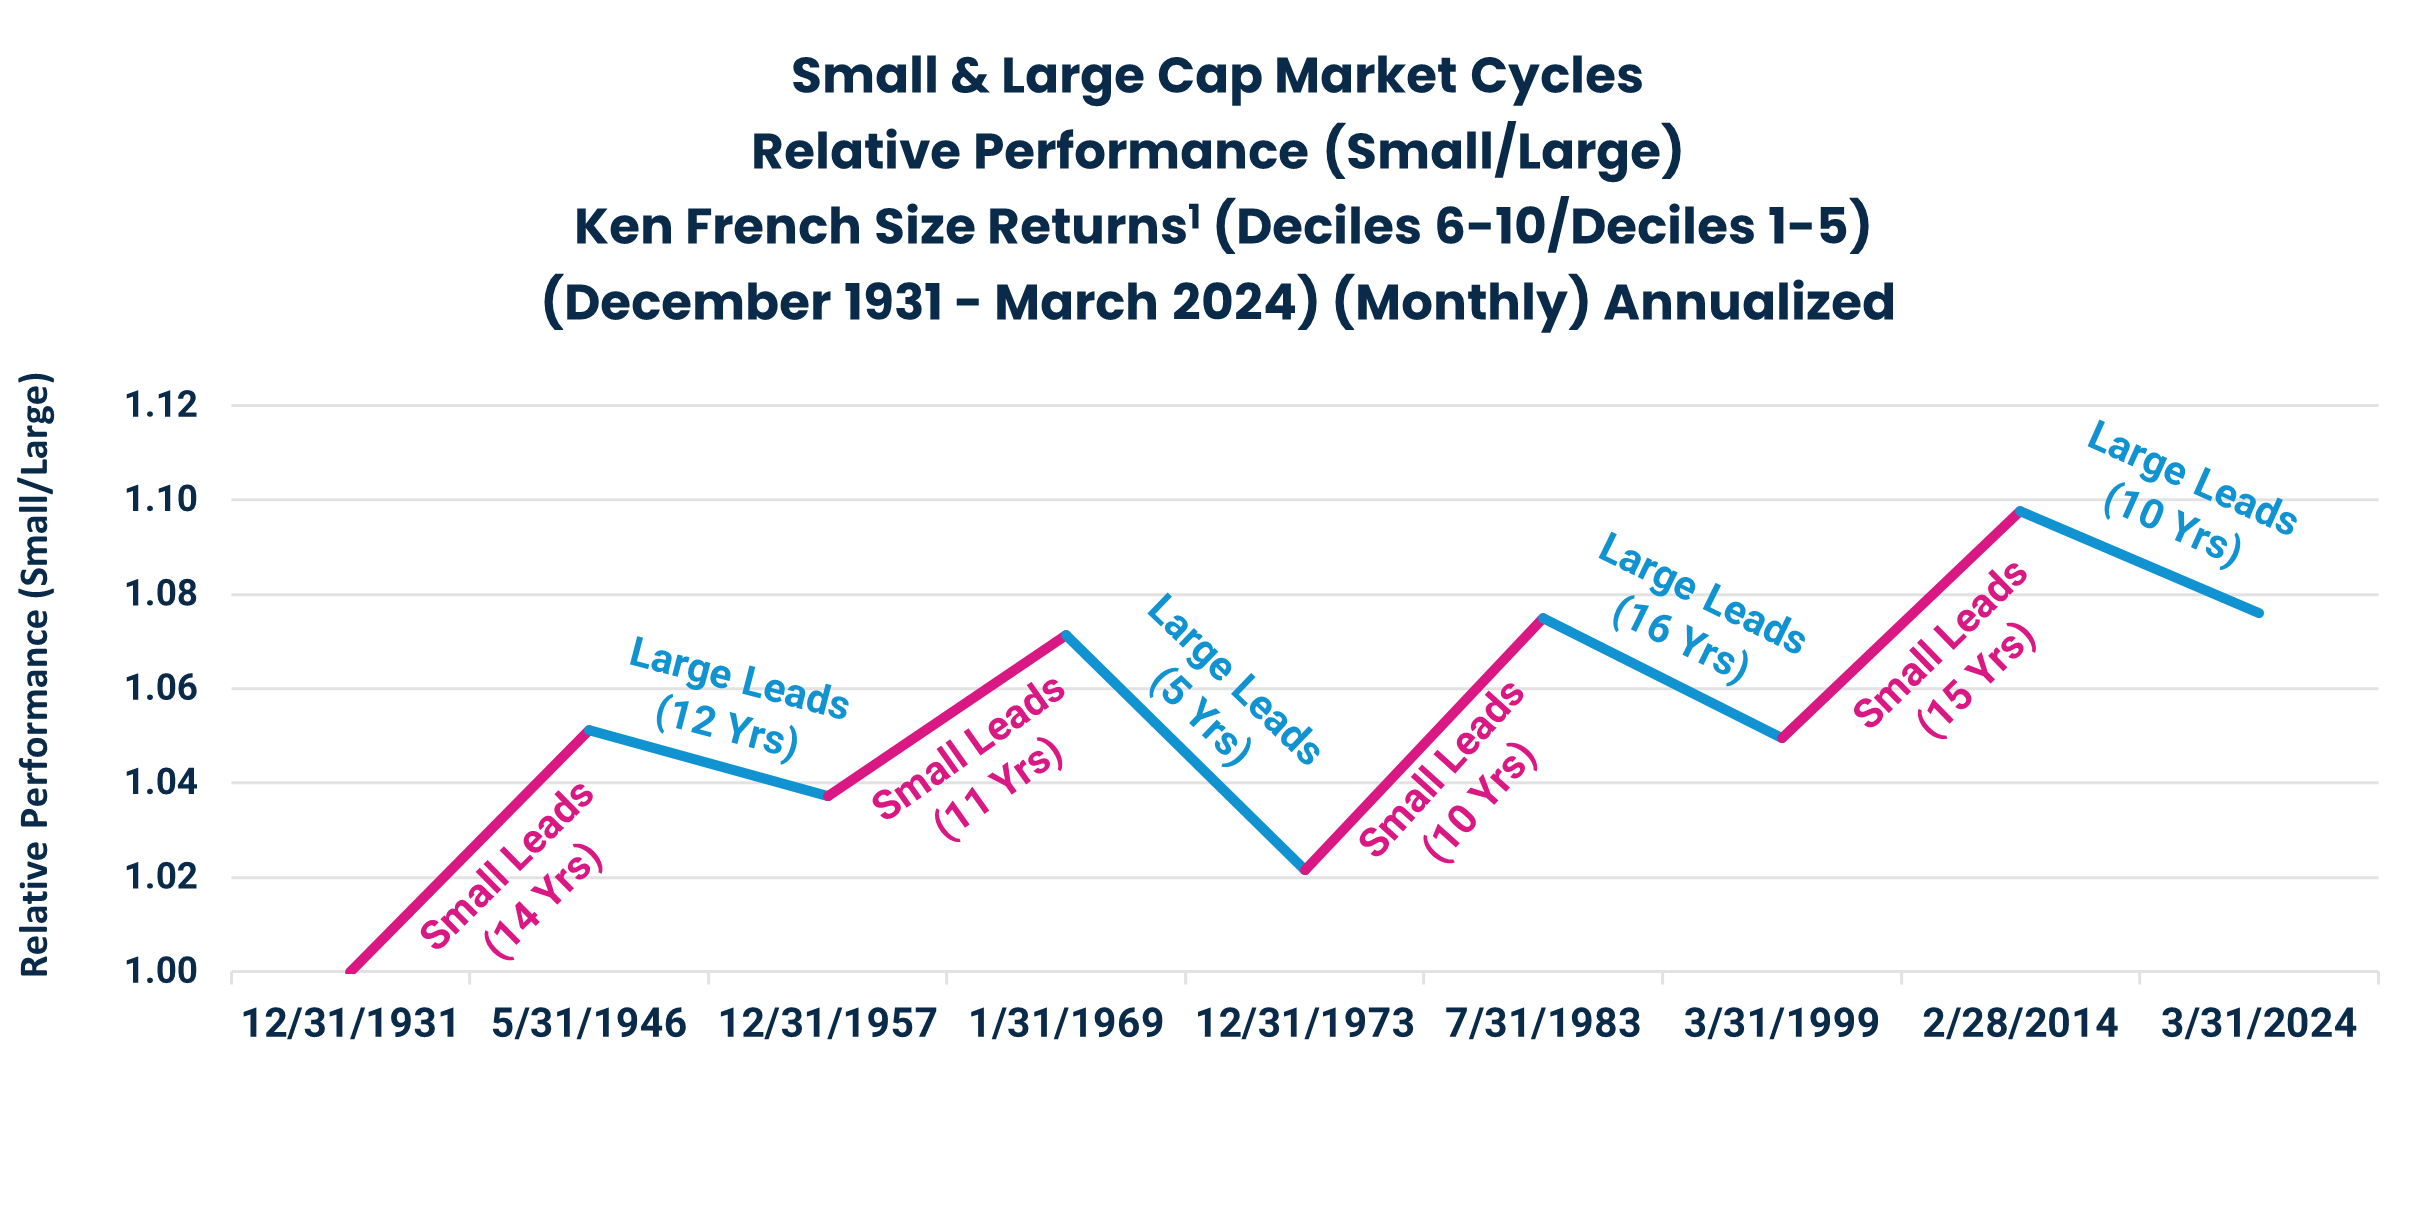 Small & Large Cap Market Cycles
Relative Performance (Small/Large)
Ken French Size Returns1 (Deciles 6-10/Deciles 1-5)
(December 1931 - March 2024) (Monthly) Annualized